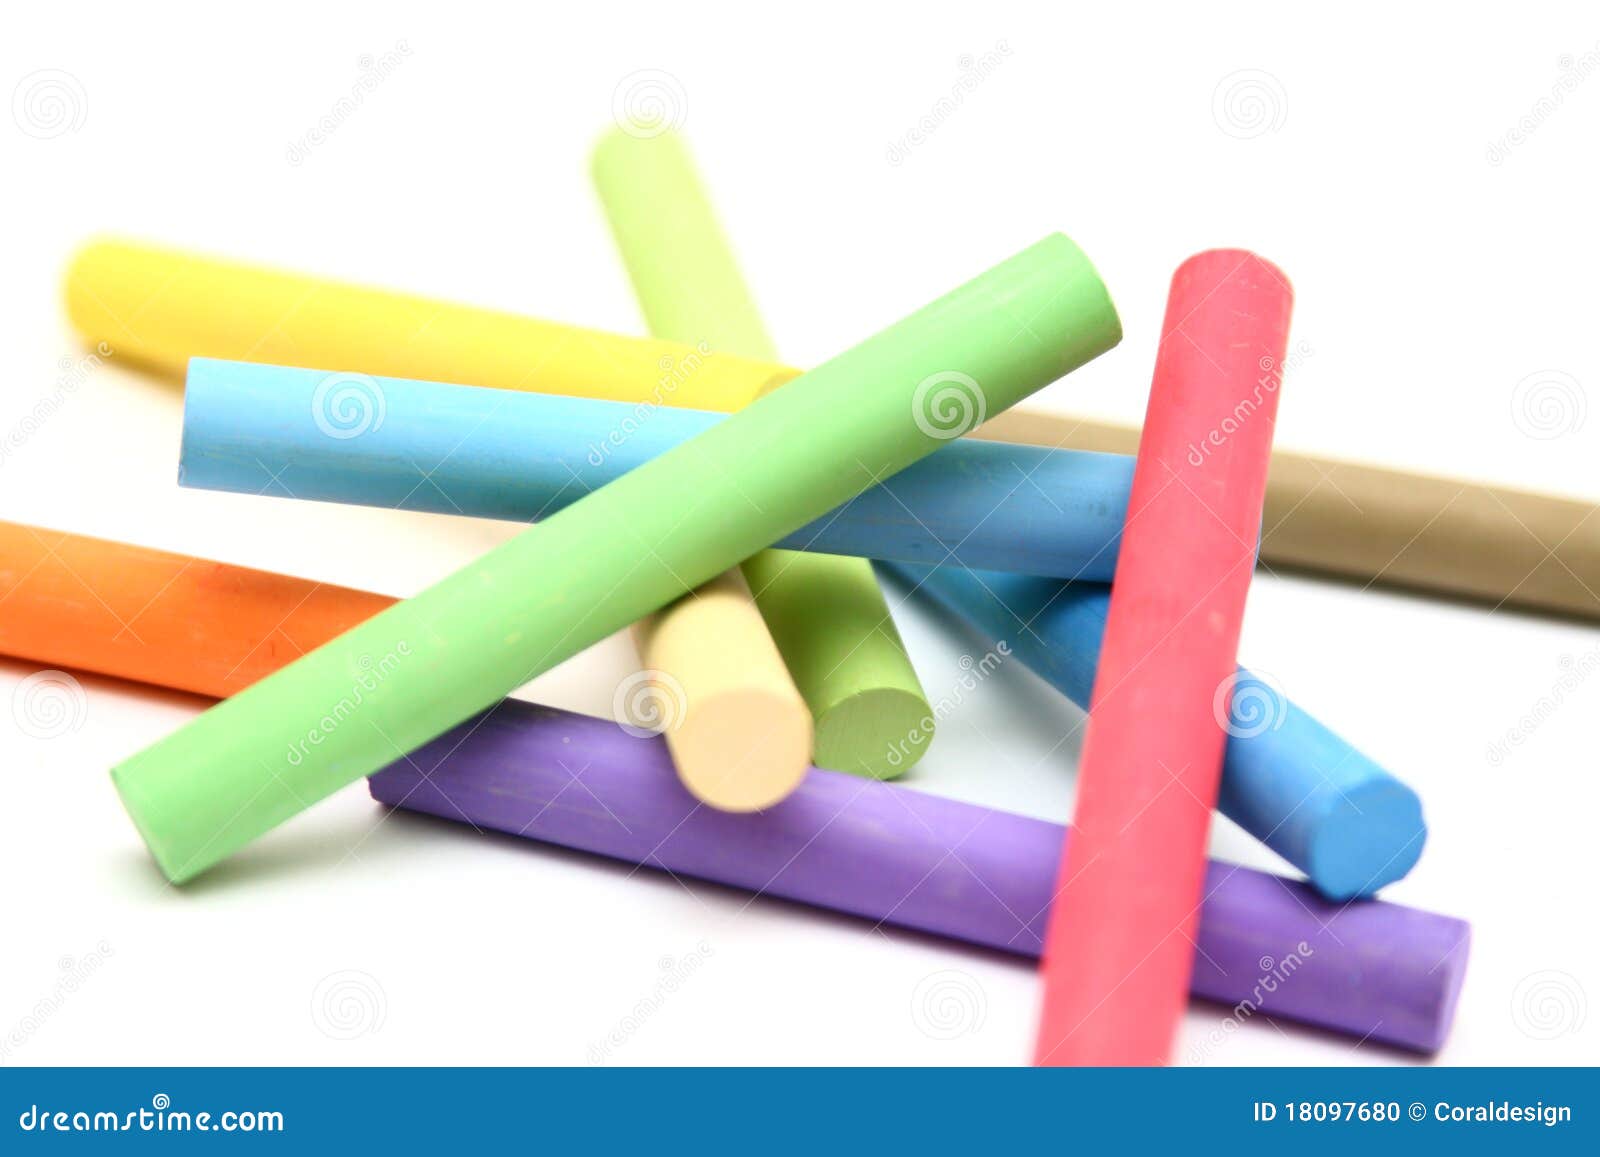 Stack of Color Chalk Sticks Stock Photo - Image of colorful, backgrounds:  18097680